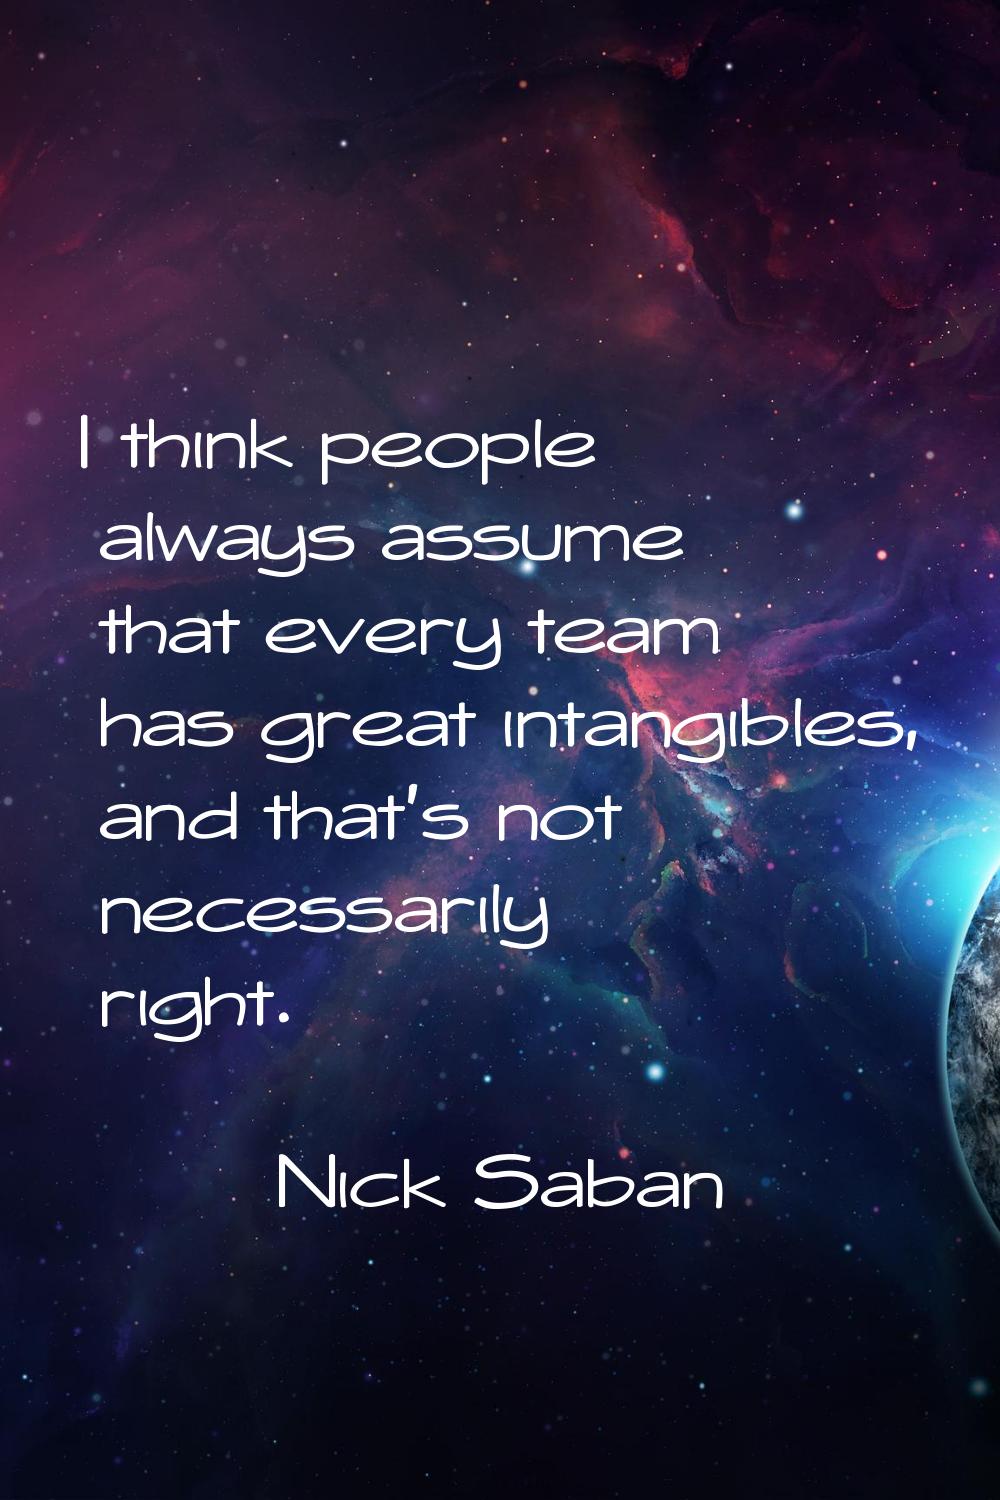 I think people always assume that every team has great intangibles, and that's not necessarily righ